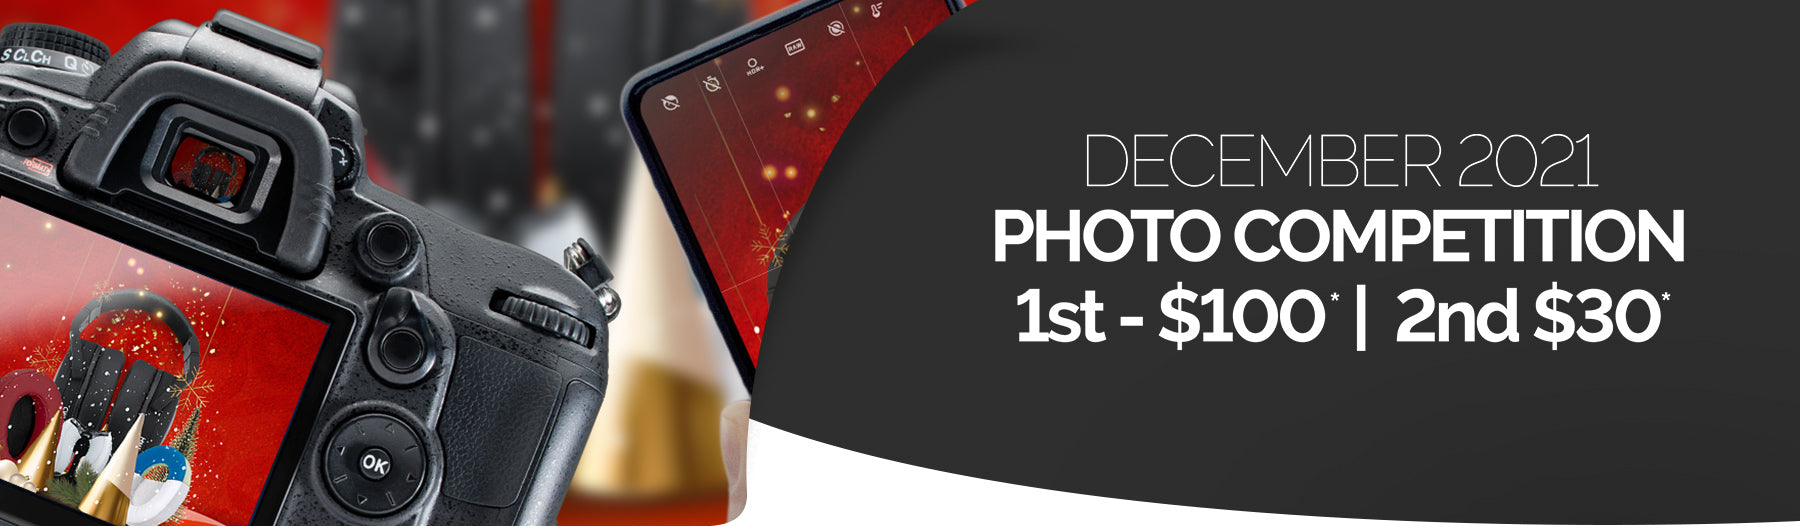 Time for the final comp of the year - Christmas Picture Comp now live